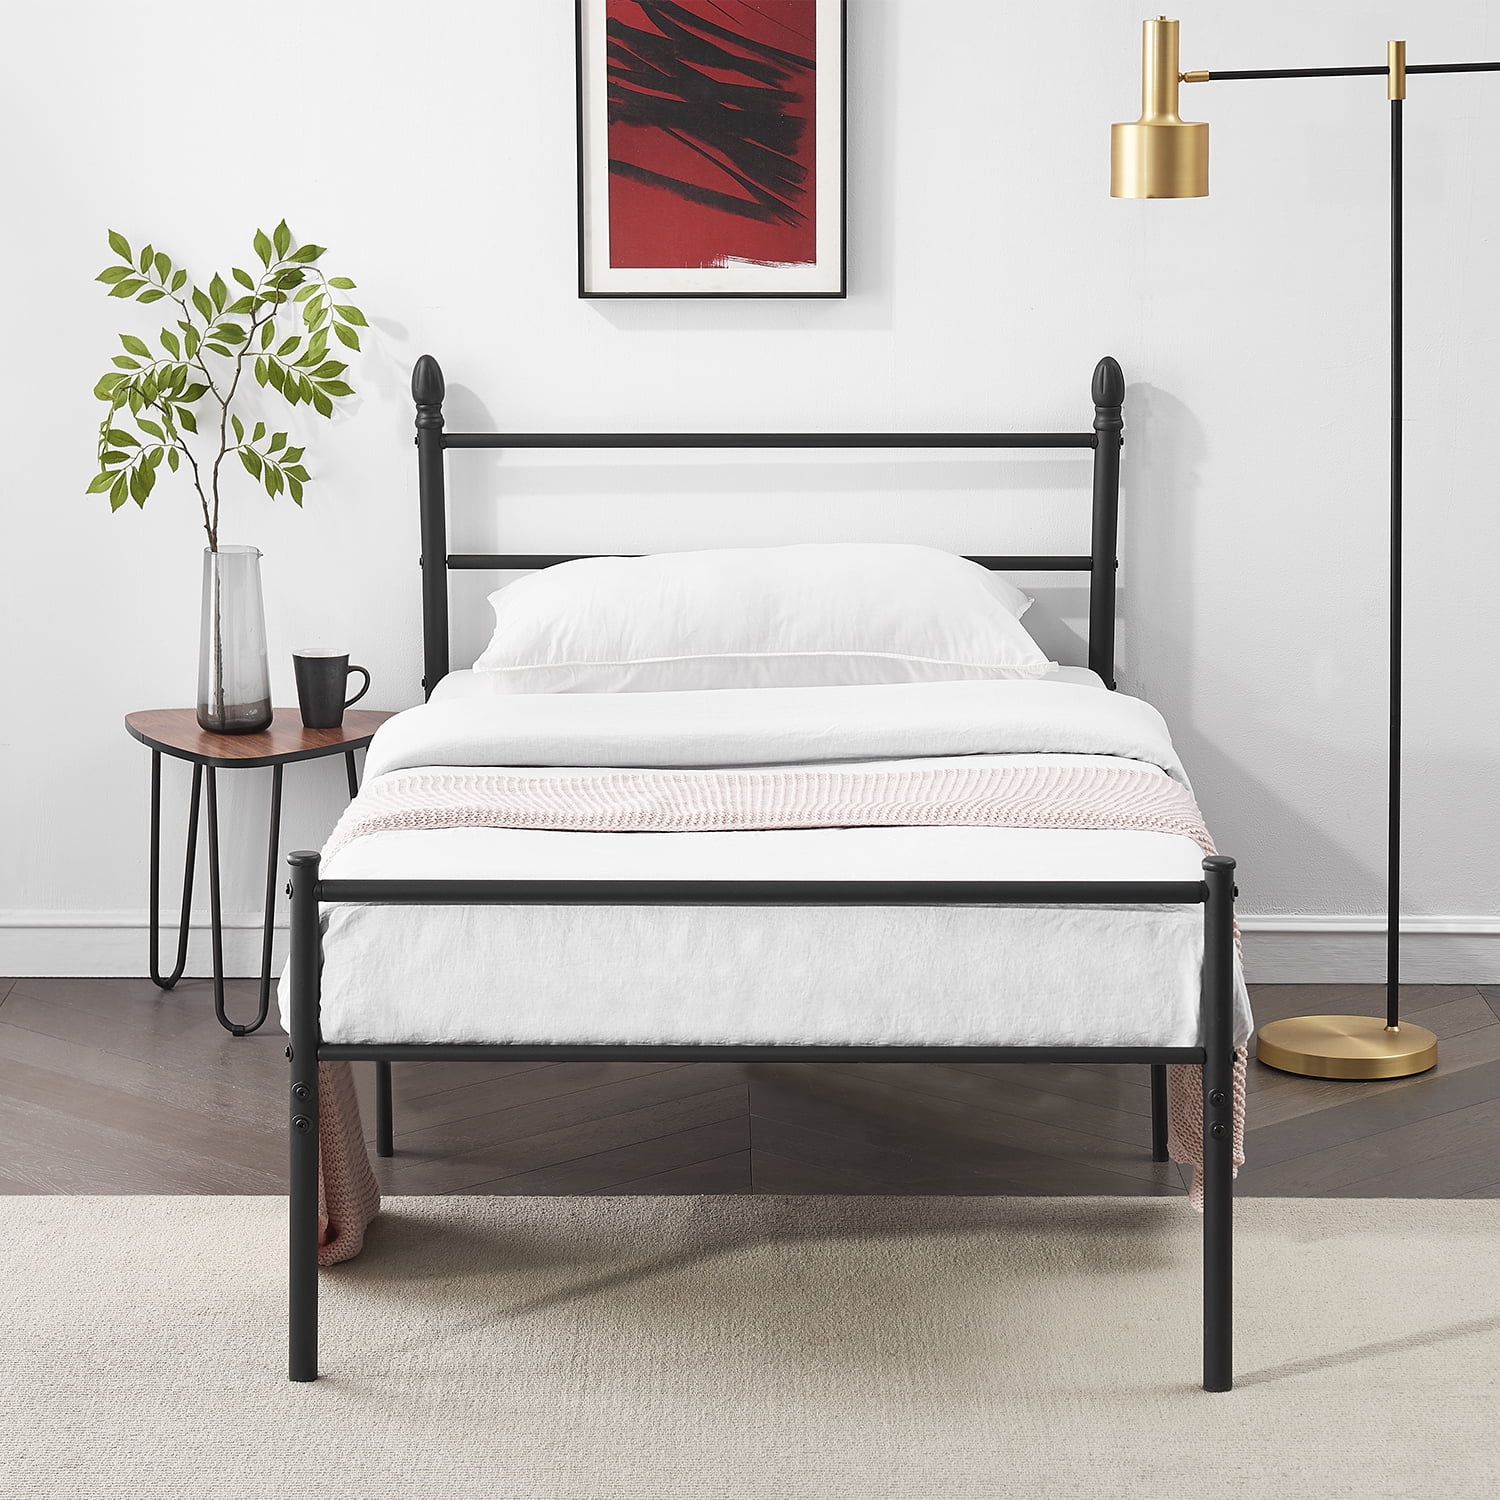 Premium Stable Steel Slat Support Easy Assembly Black EASE-WAY Twin Size Bed Frames Metal No Box Spring Needed Modern Style Headboard and Footboard